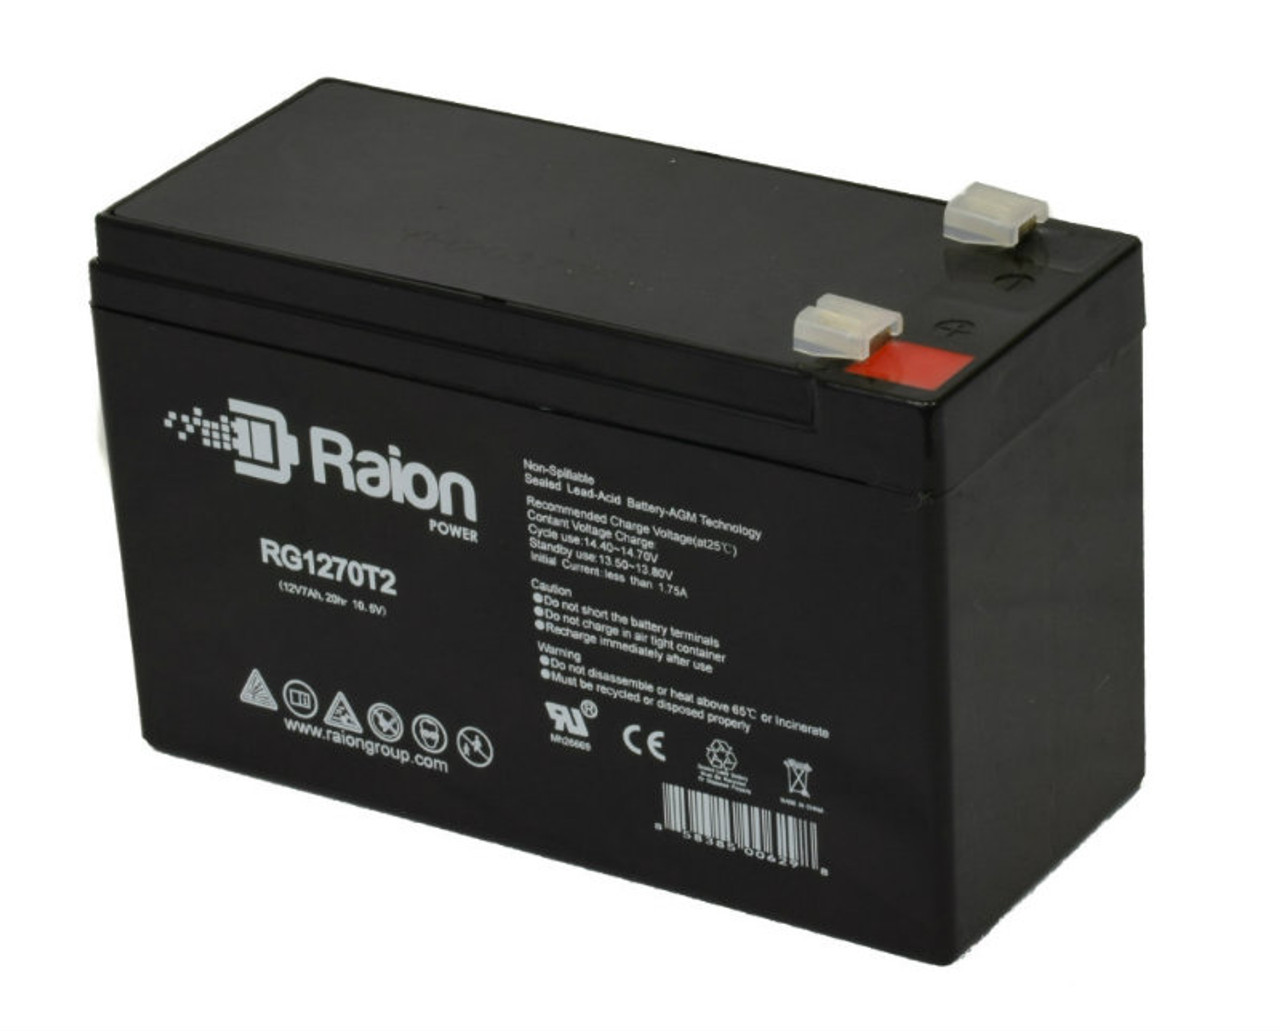 Raion Power Replacement 12V 7Ah RG1270T1 Fire Alarm Battery for Altronix SMP312CX